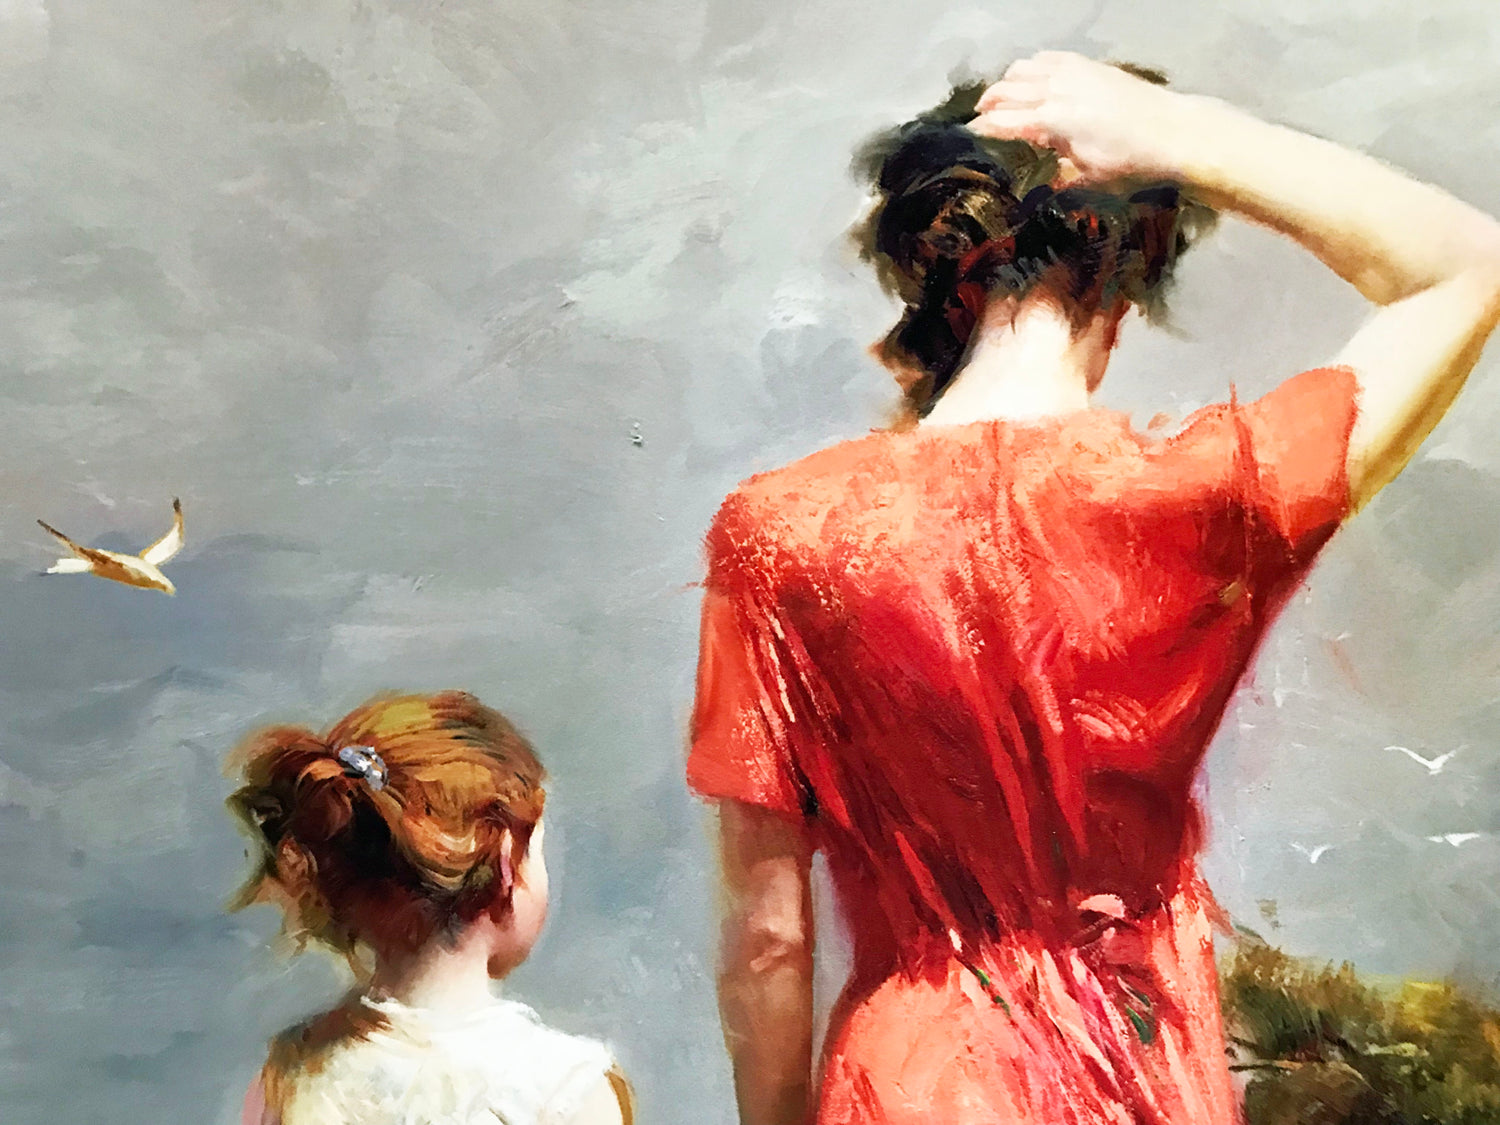 Afternoon Stroll Pino Daeni Giclée Print Artist Hand Signed and Numbered